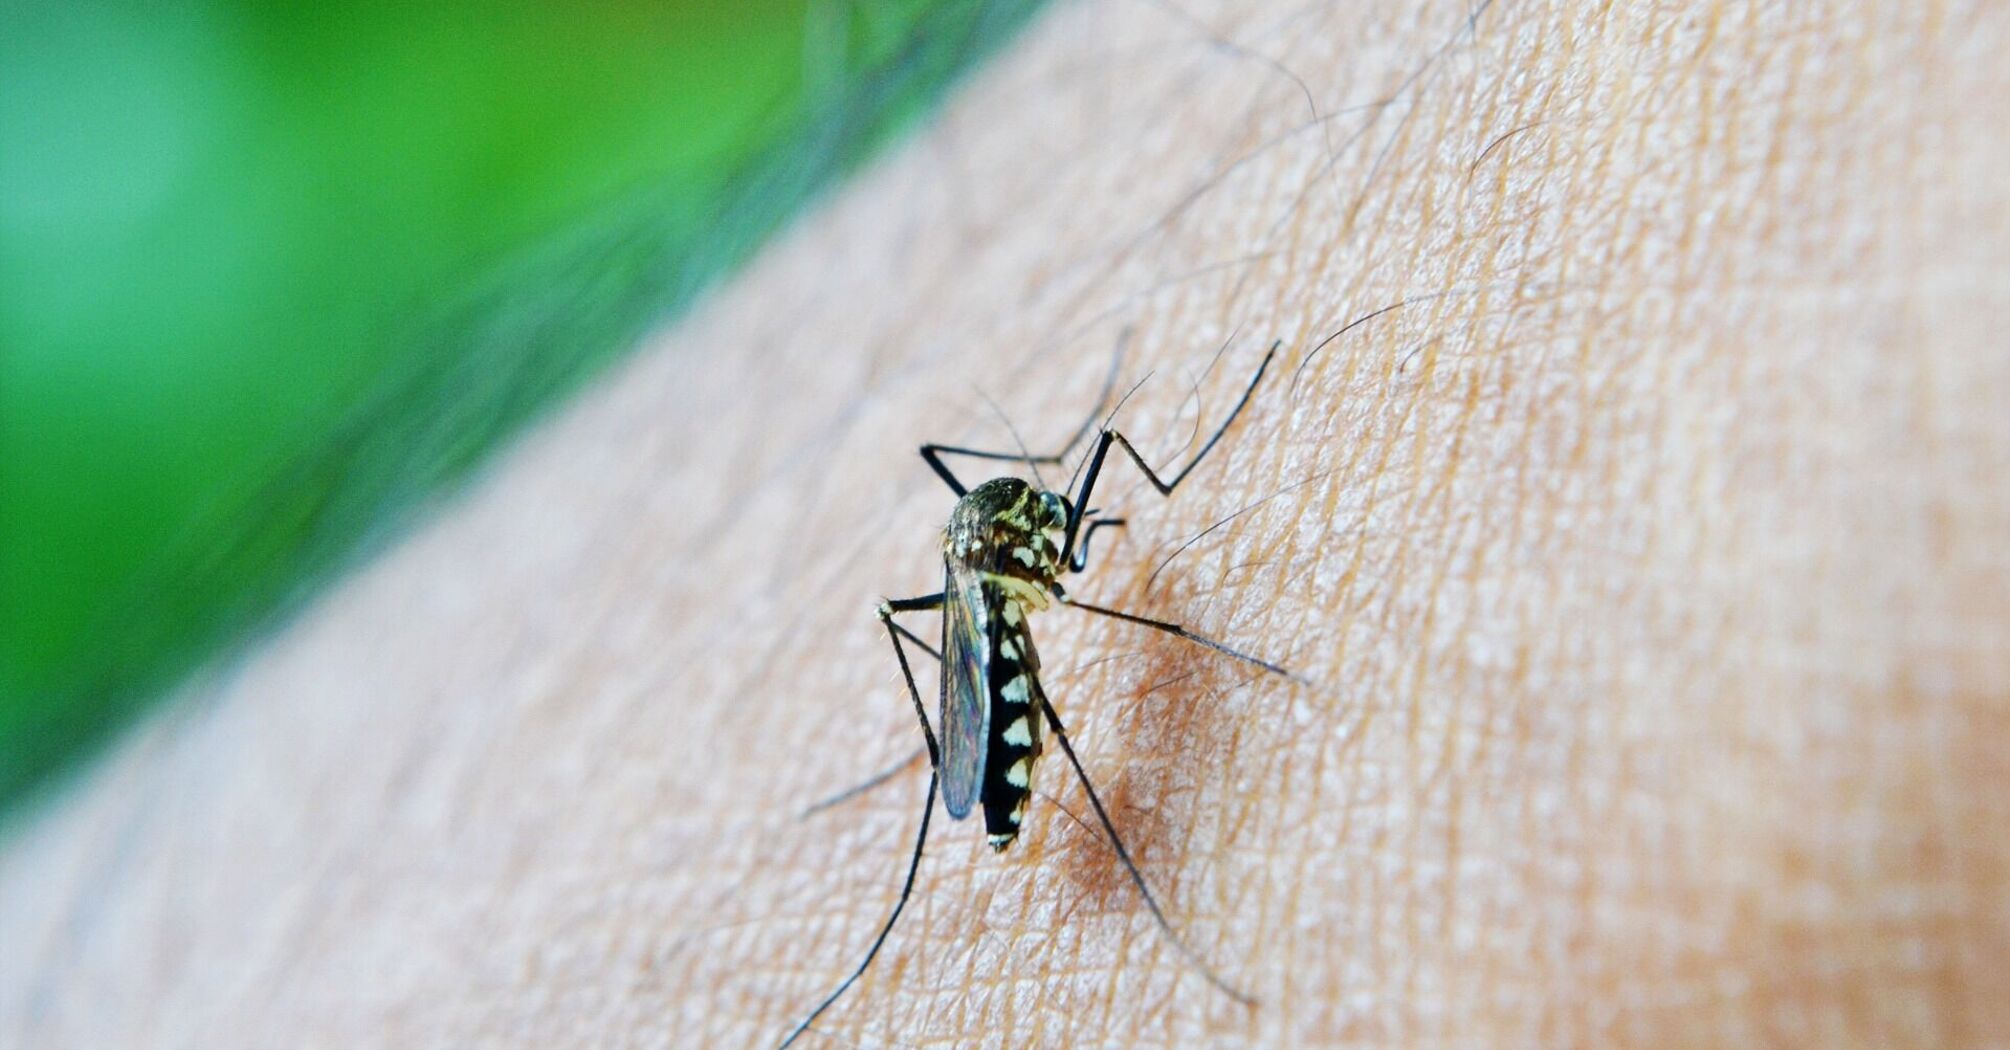 Mosquito could transmit Zica infection